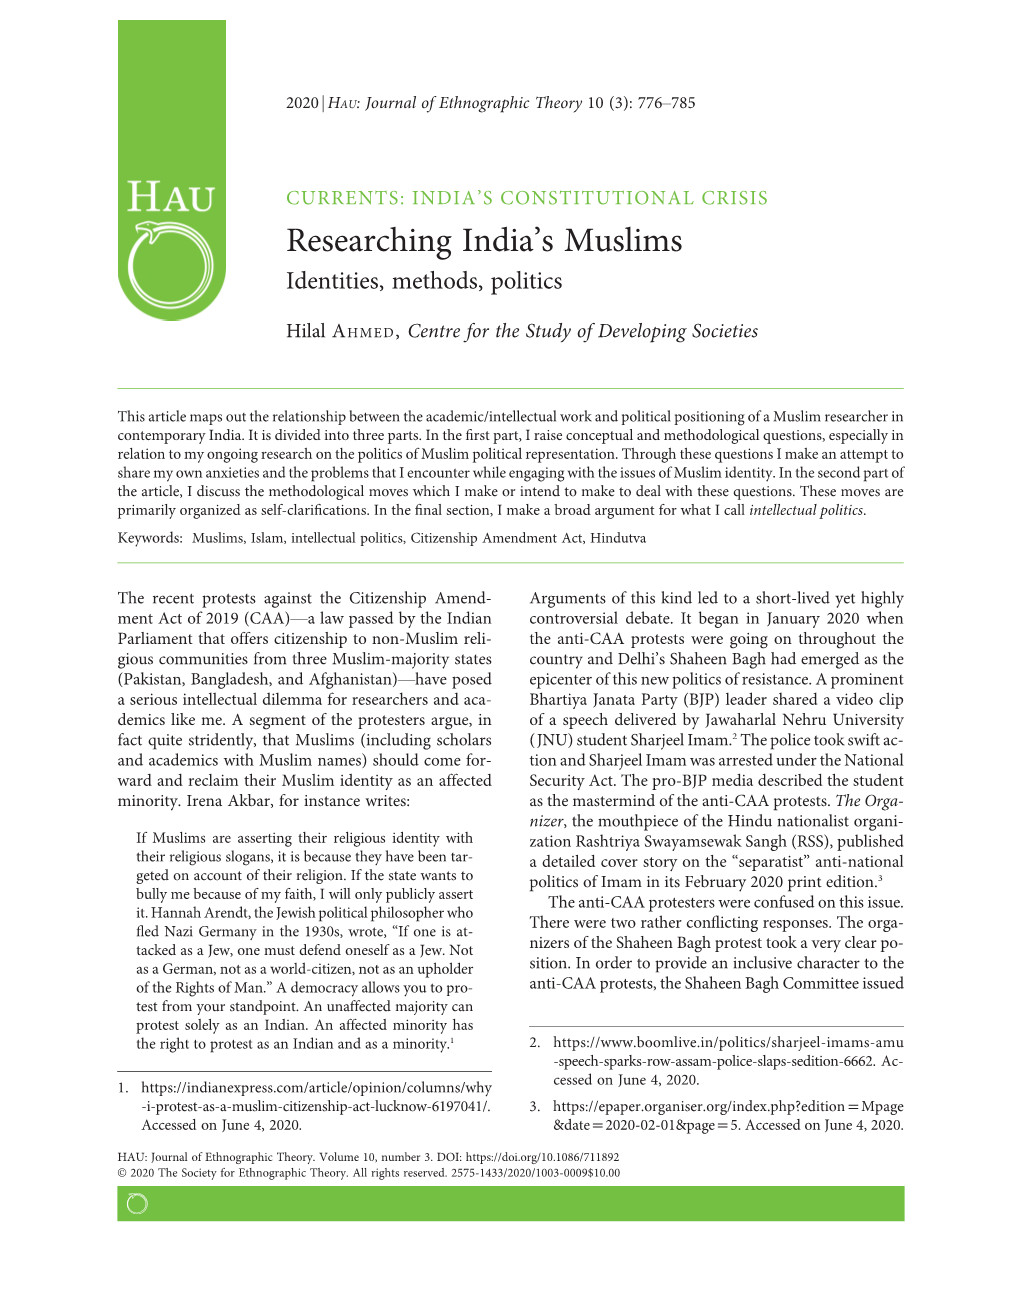 Researching India's Muslims